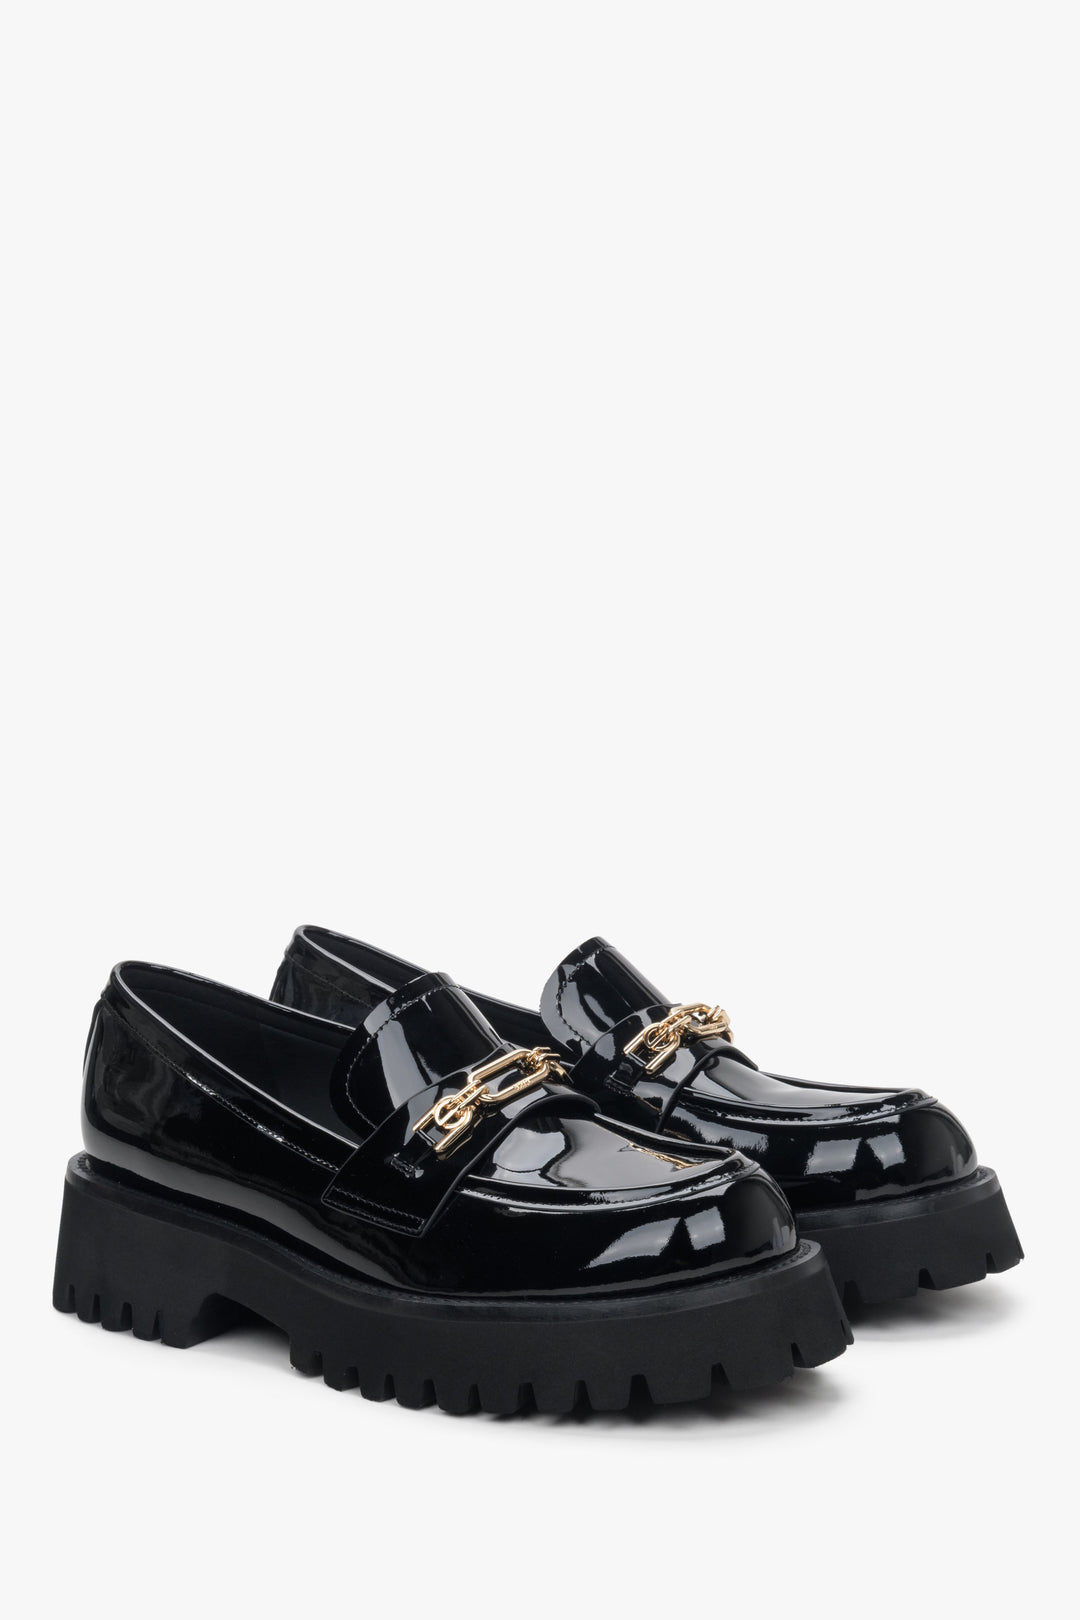 Women's black moccasins with gold buckle made of patent leather by Estro.